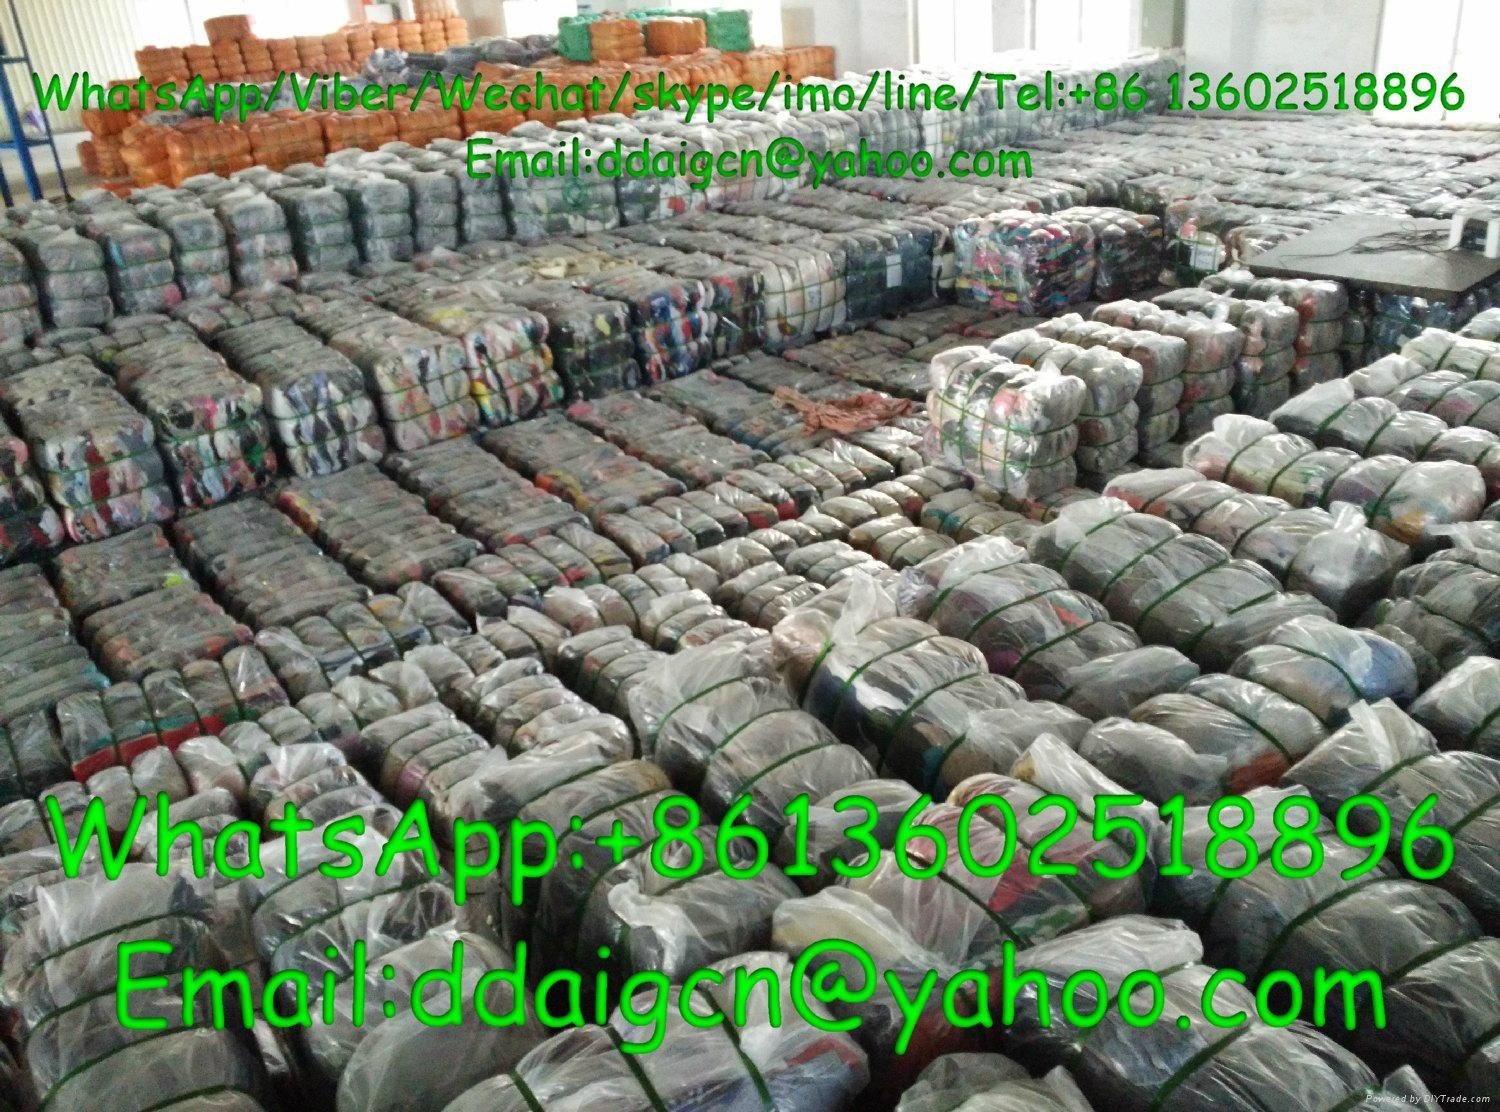 Second Hand Clothes Bales - A1 - DDA (China Manufacturer) - Children  Garment - Apparel & Fashion Products - DIYTrade China manufacturers